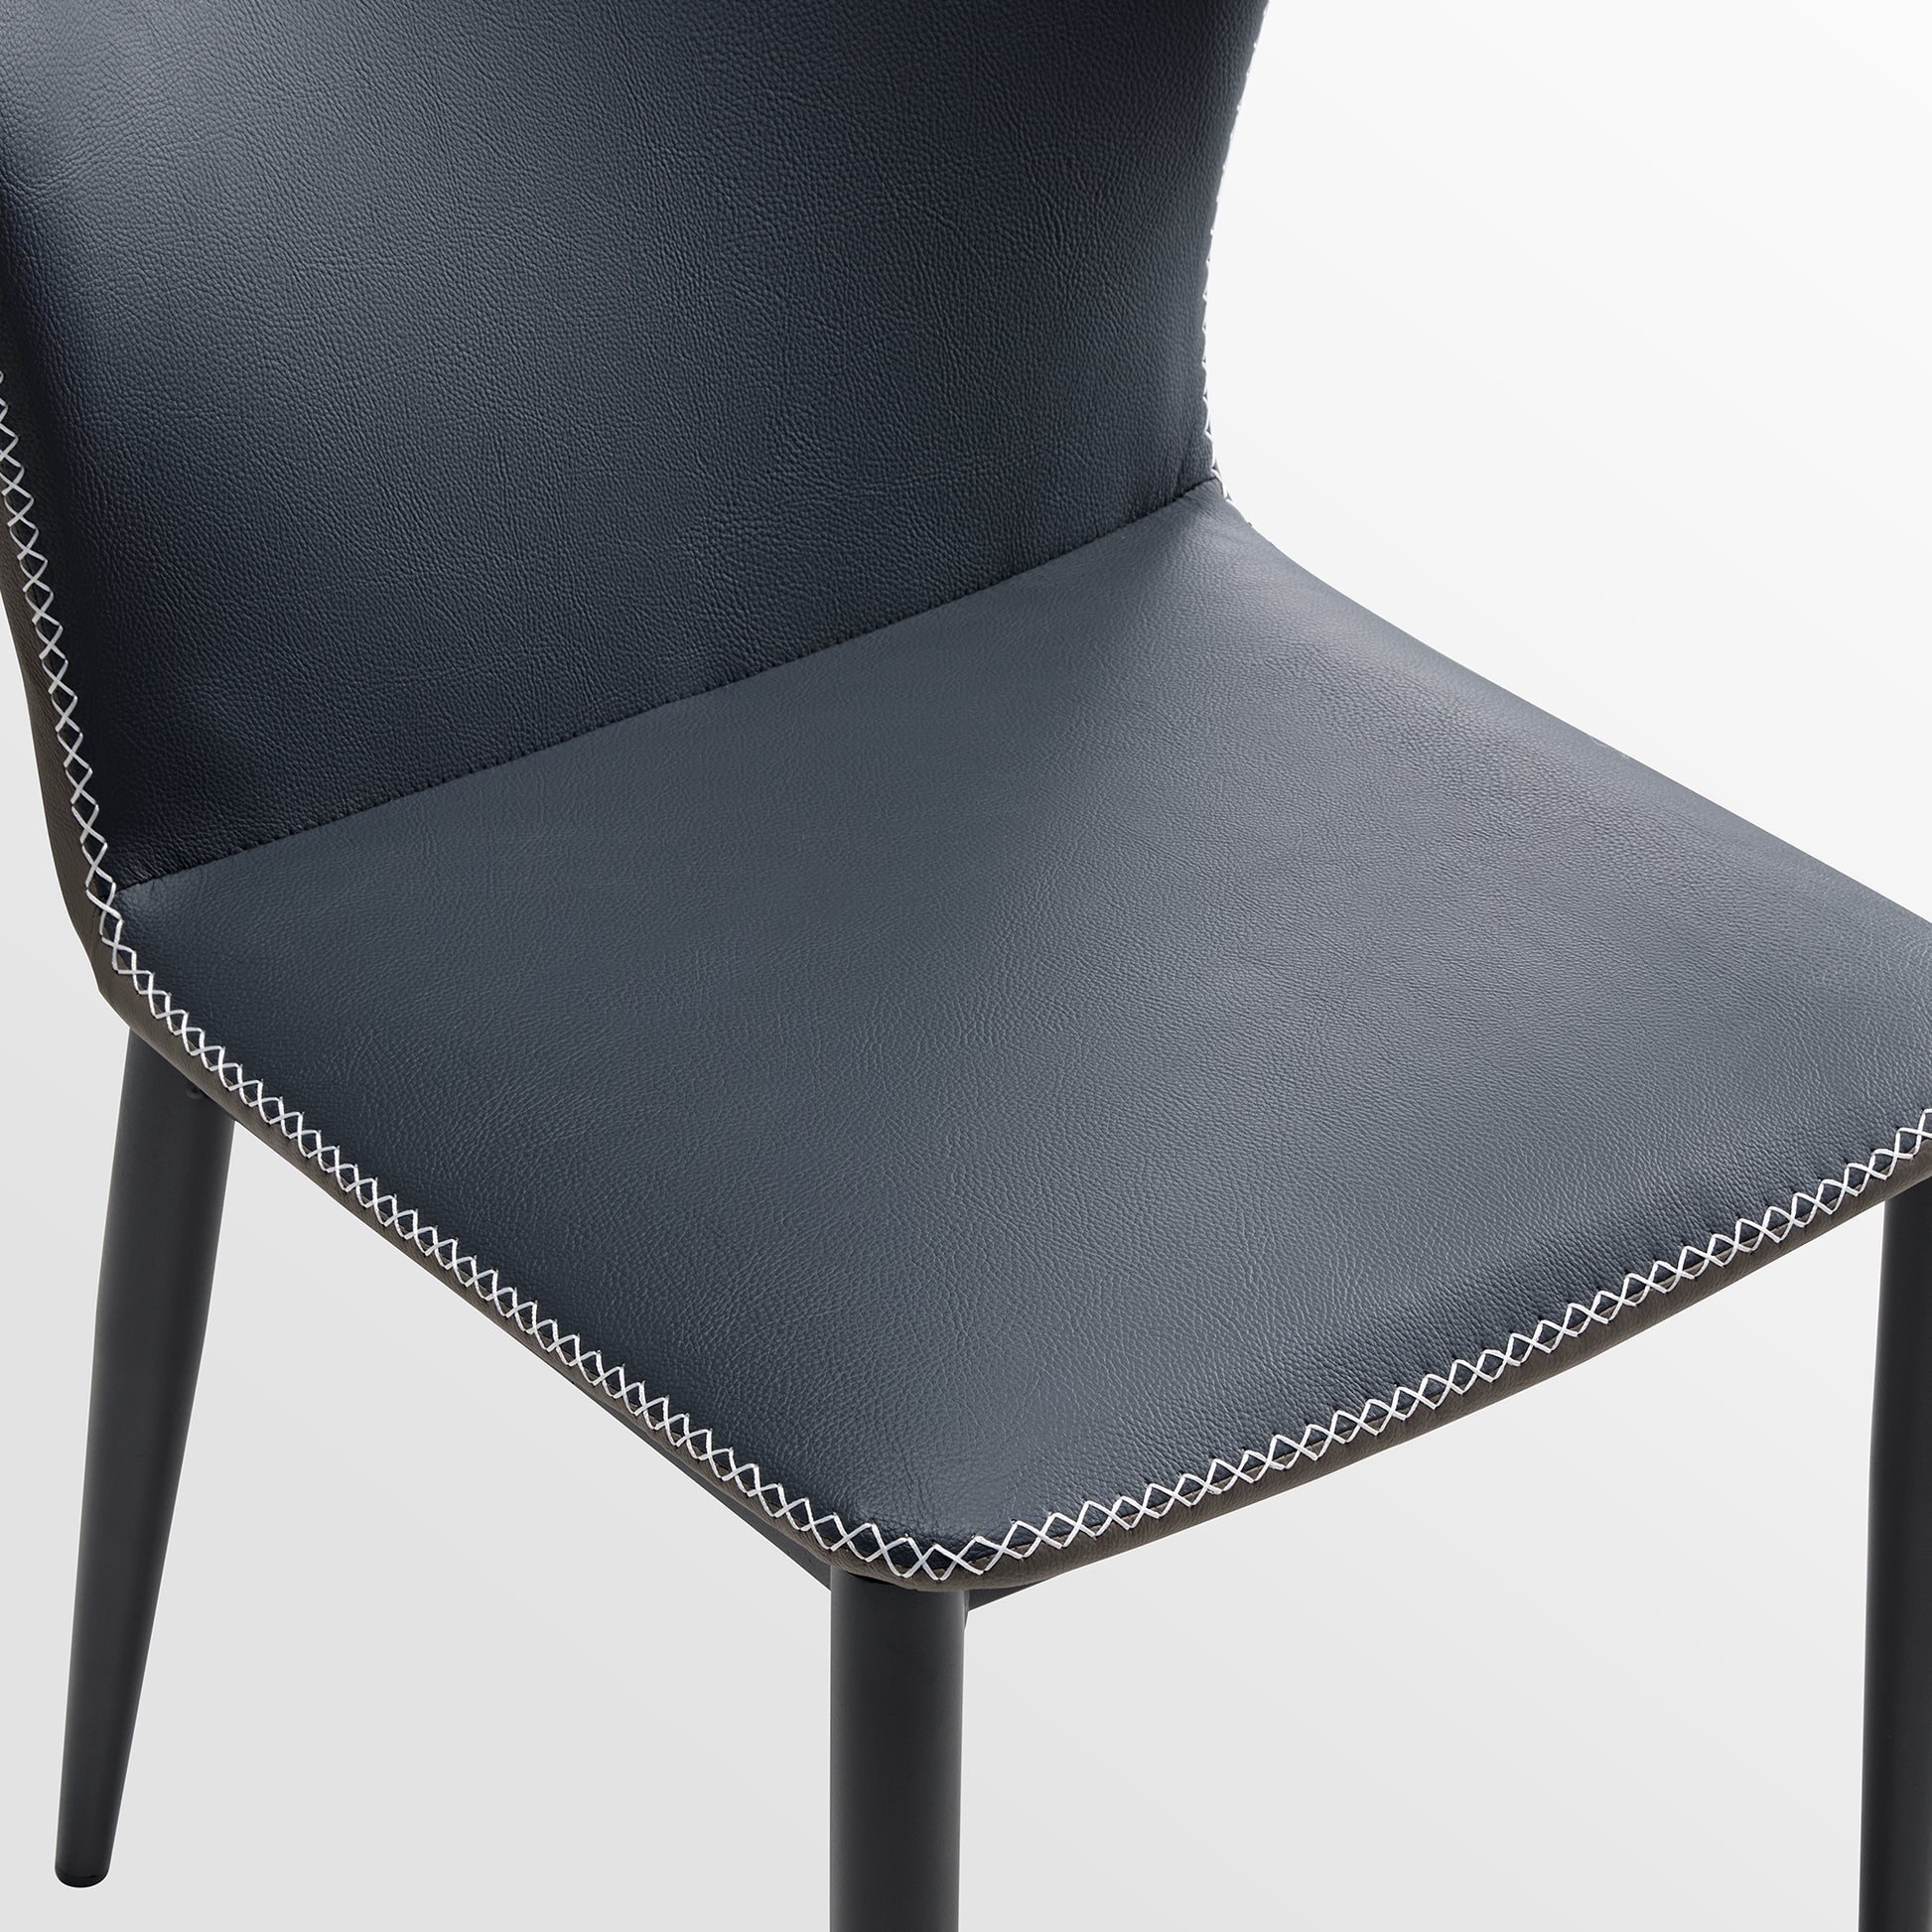 Eureka Luxury Blue Dining Chairs with A Modern Backrest Set of 2, Generous Seat Depth